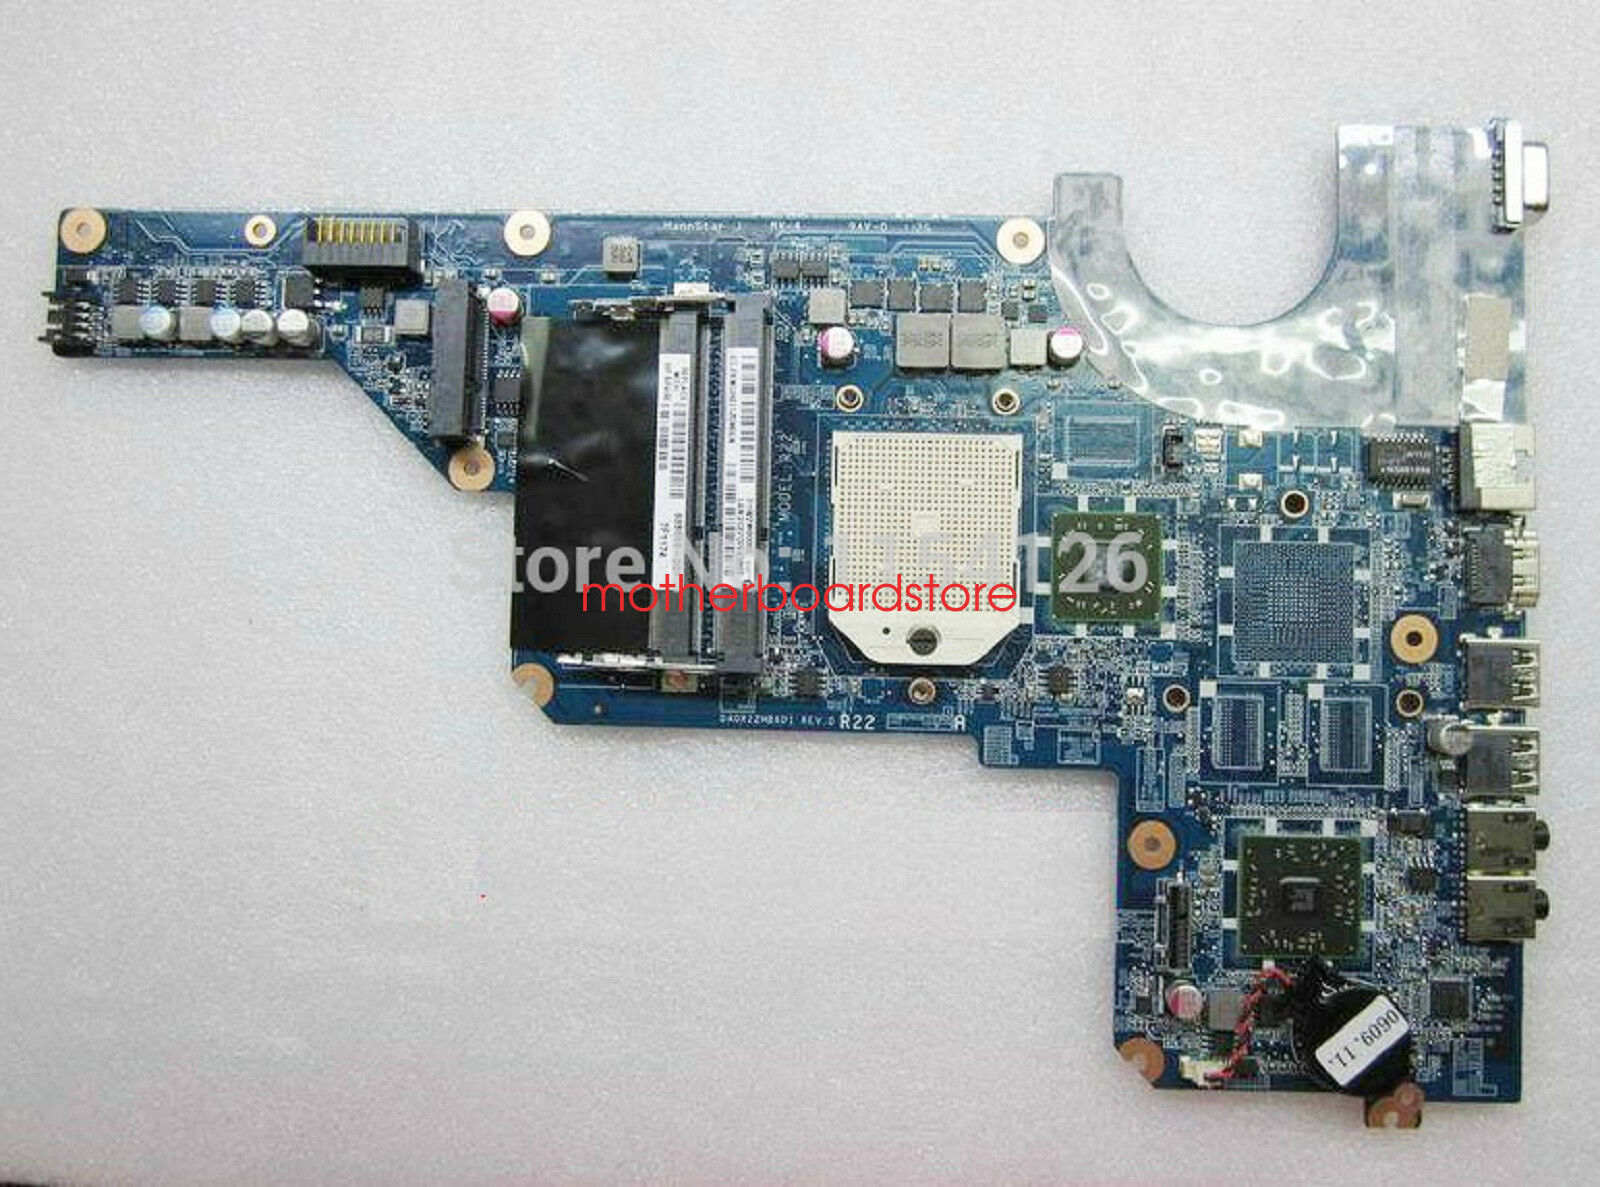 HP G4 G7 G4-1021CA G7-1075DX AMD Motherboard 638856-001 DA0R22MB6D0 Tested Good Compatible CPU Brand: AMD - Click Image to Close